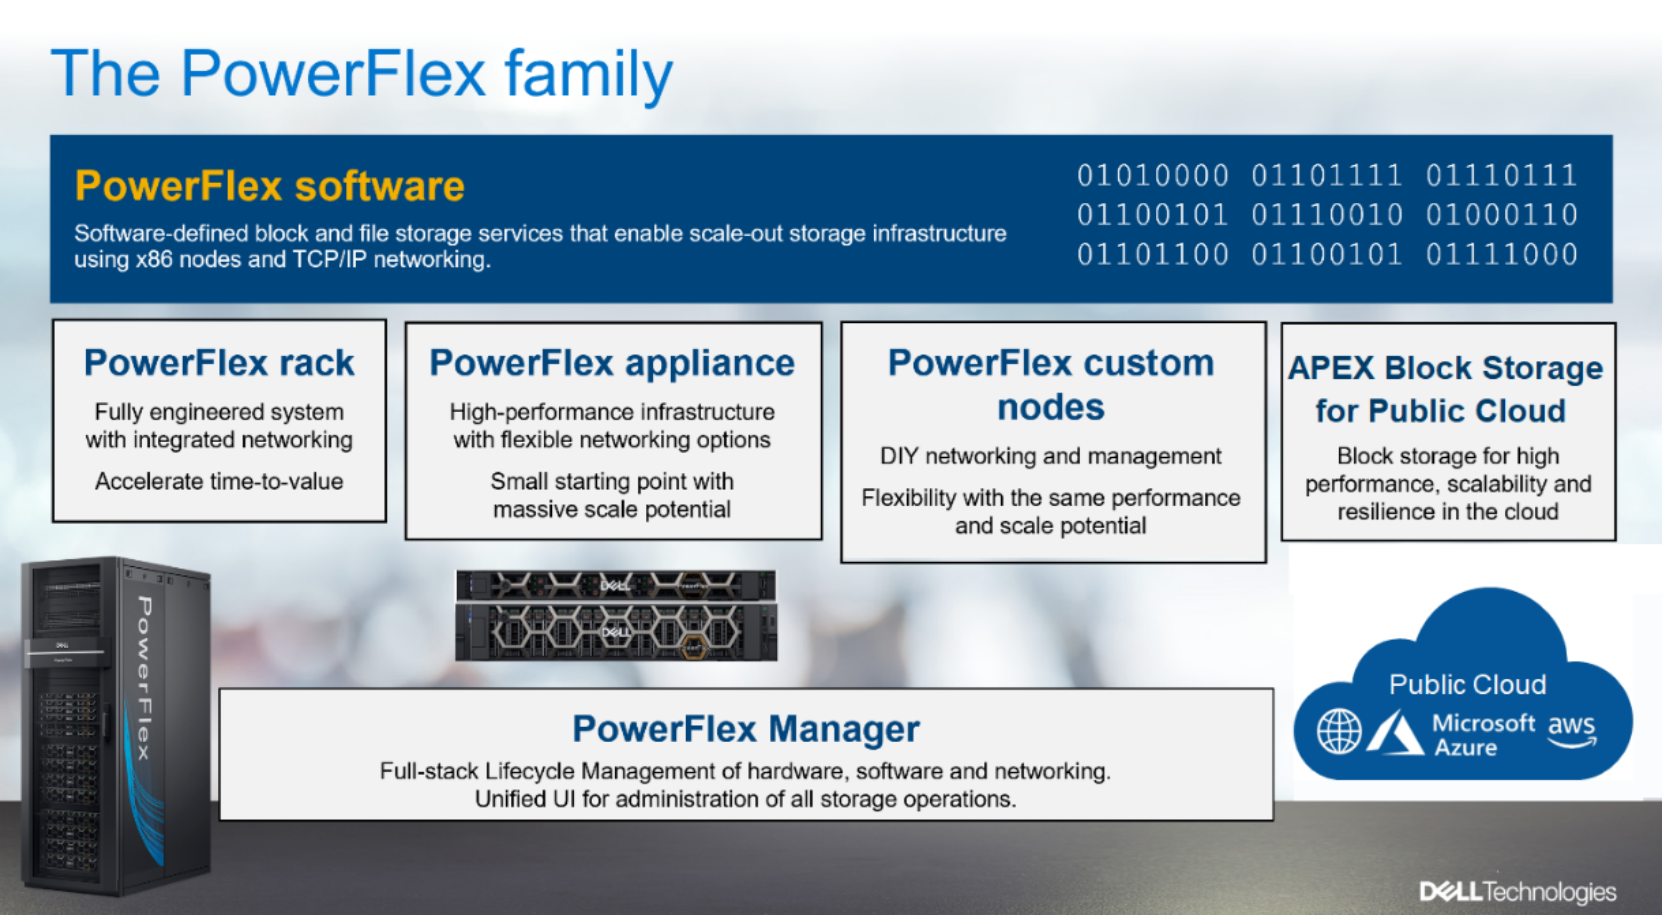 This figure shows the PowerFlex family components.